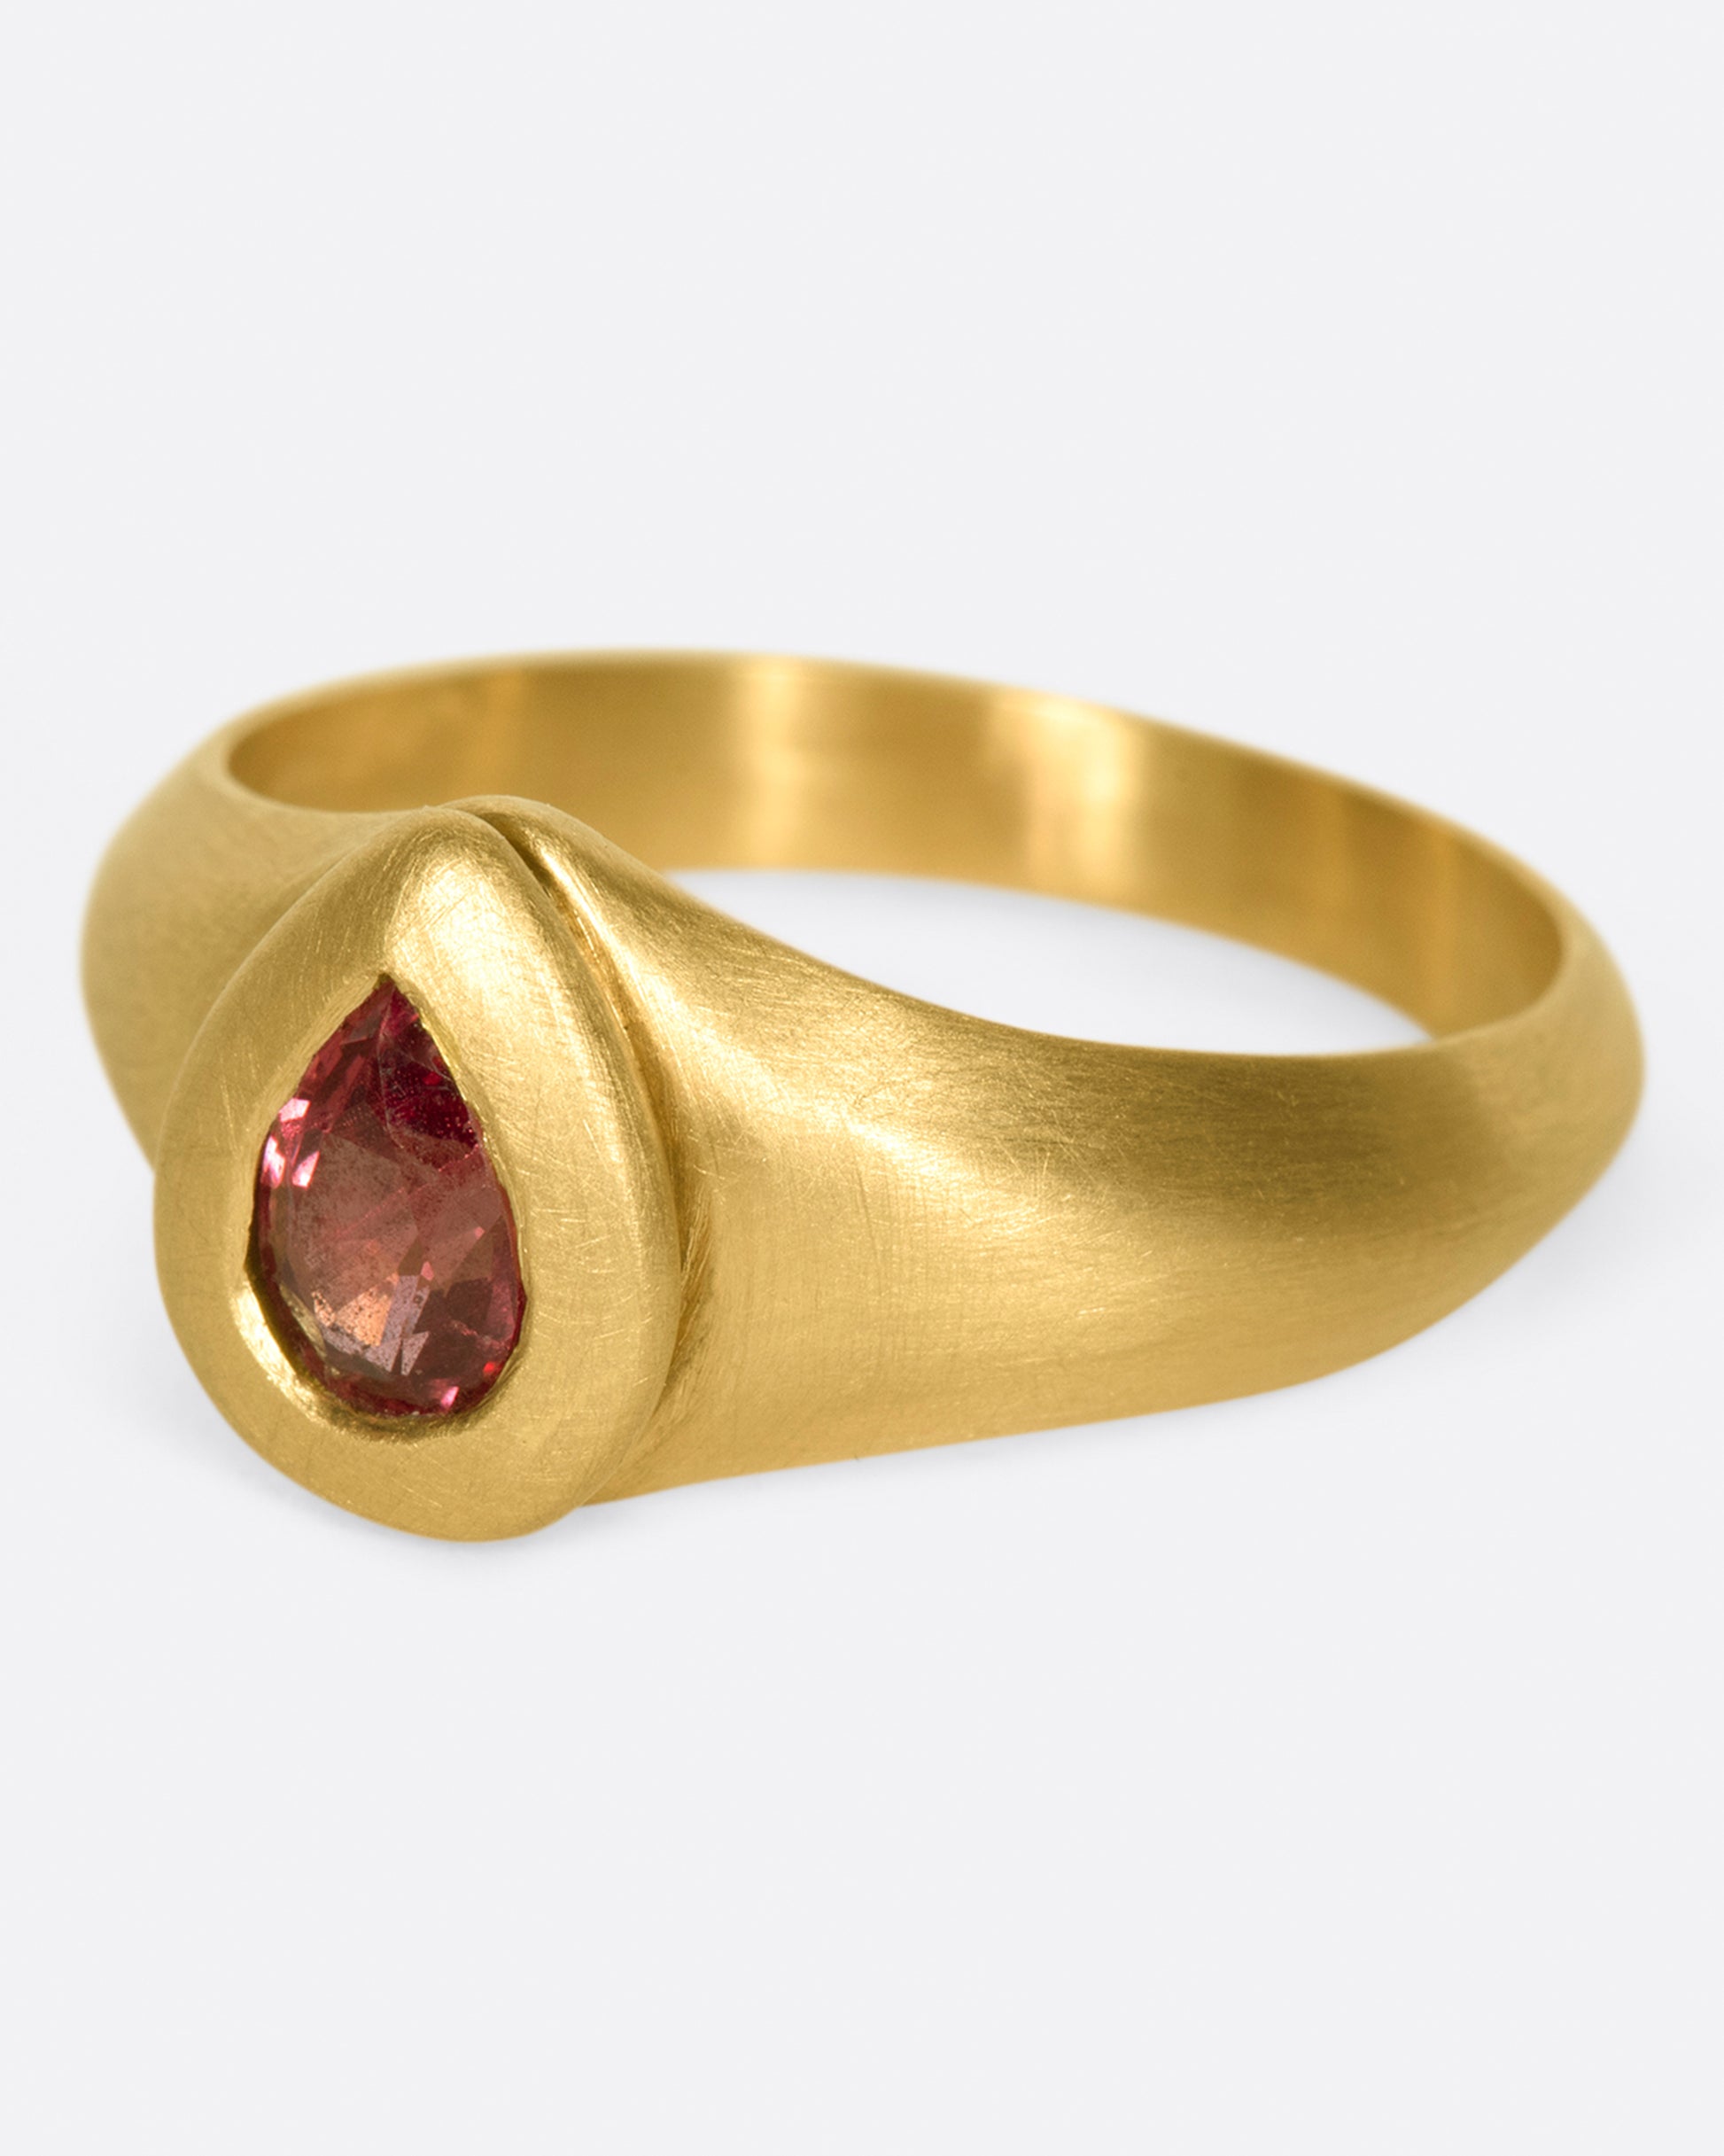 A one of a kind gold ring with a teardrop shaped orangey-pink spinel at its center.